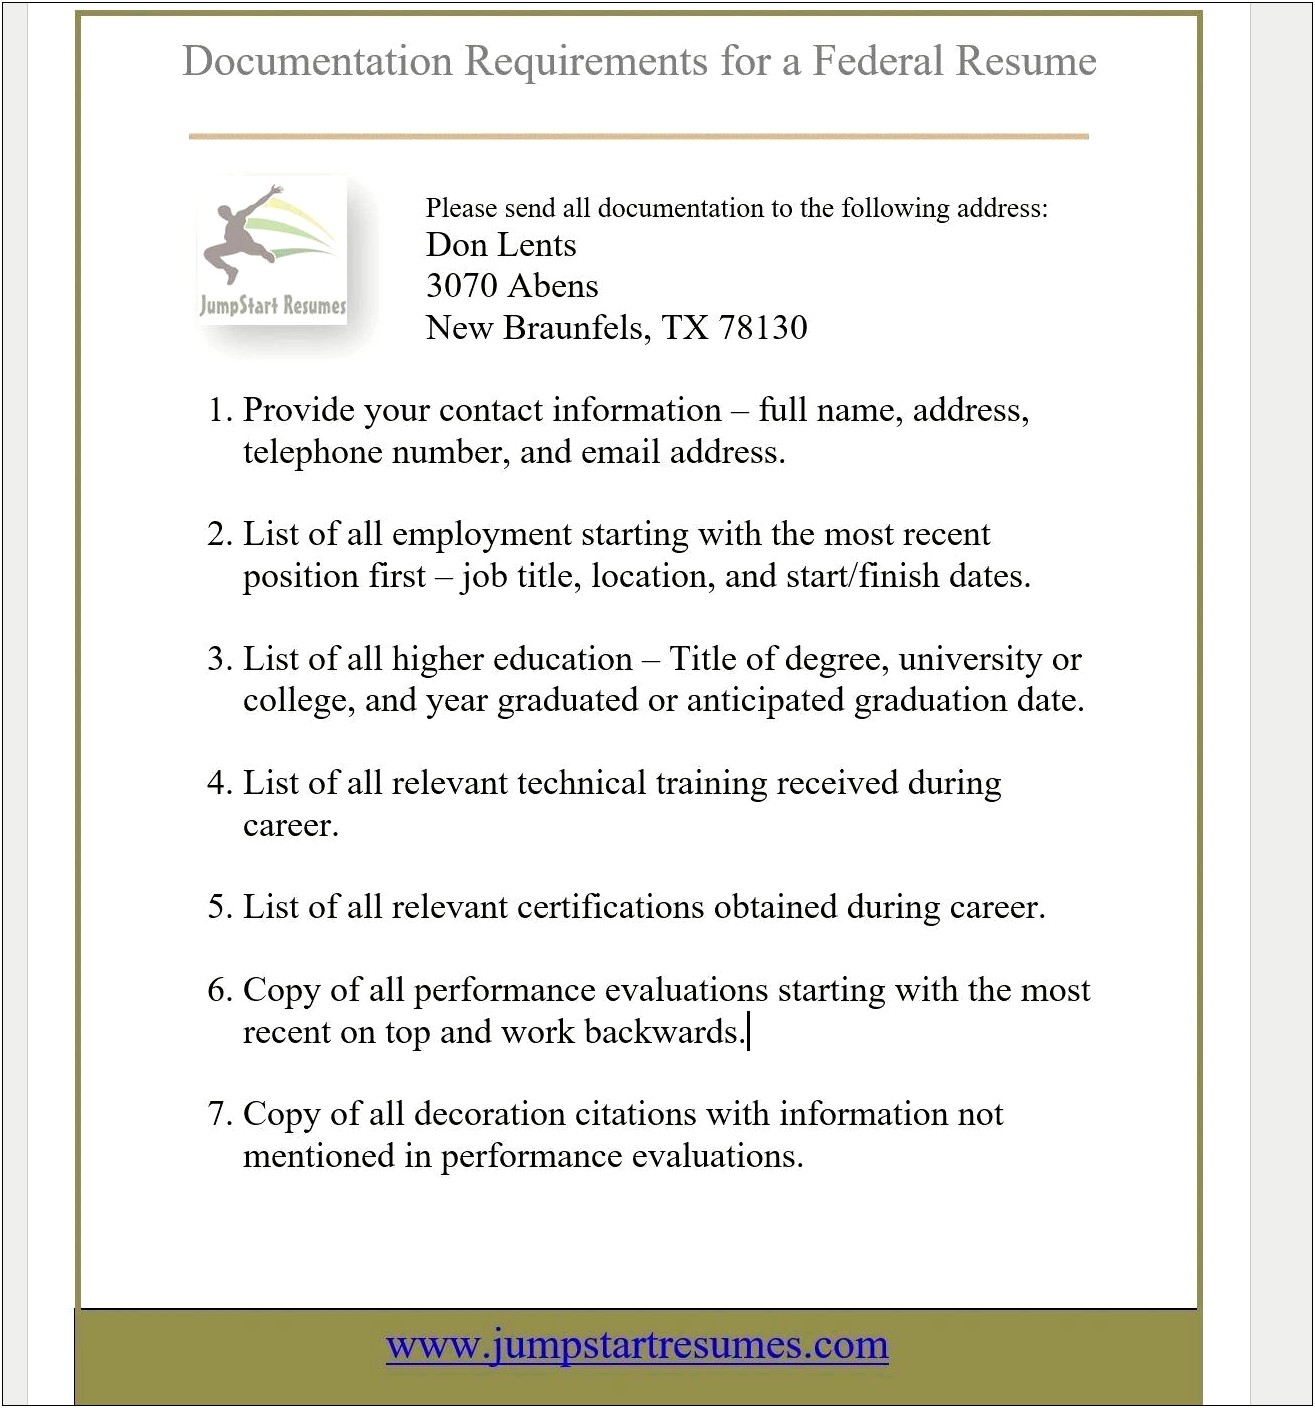 Job Related Training Federal Resume